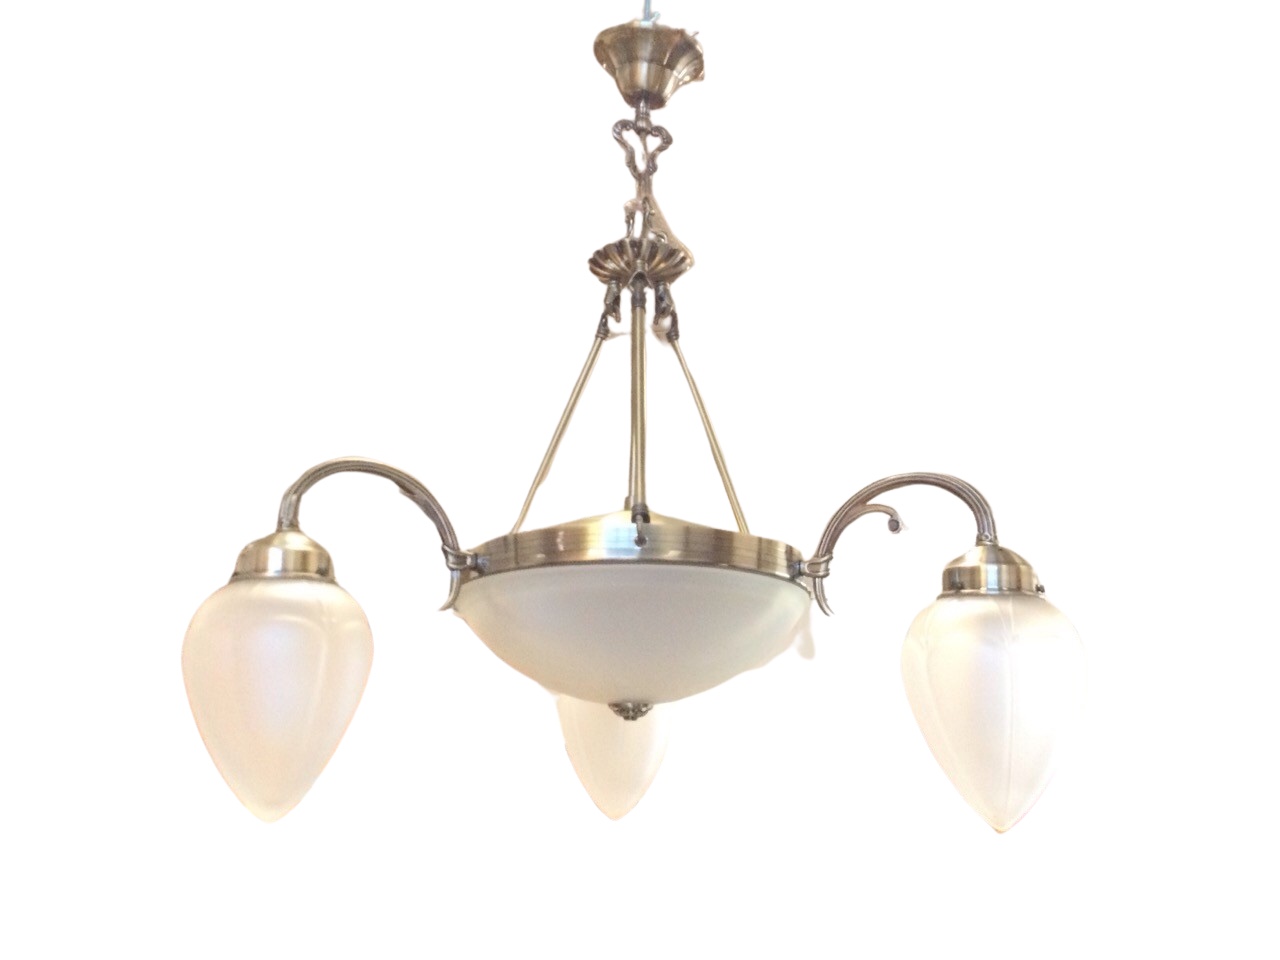 An Edwardian style hanging light with flared ceiling rose suspending rods supporting a ring with - Bild 2 aus 3